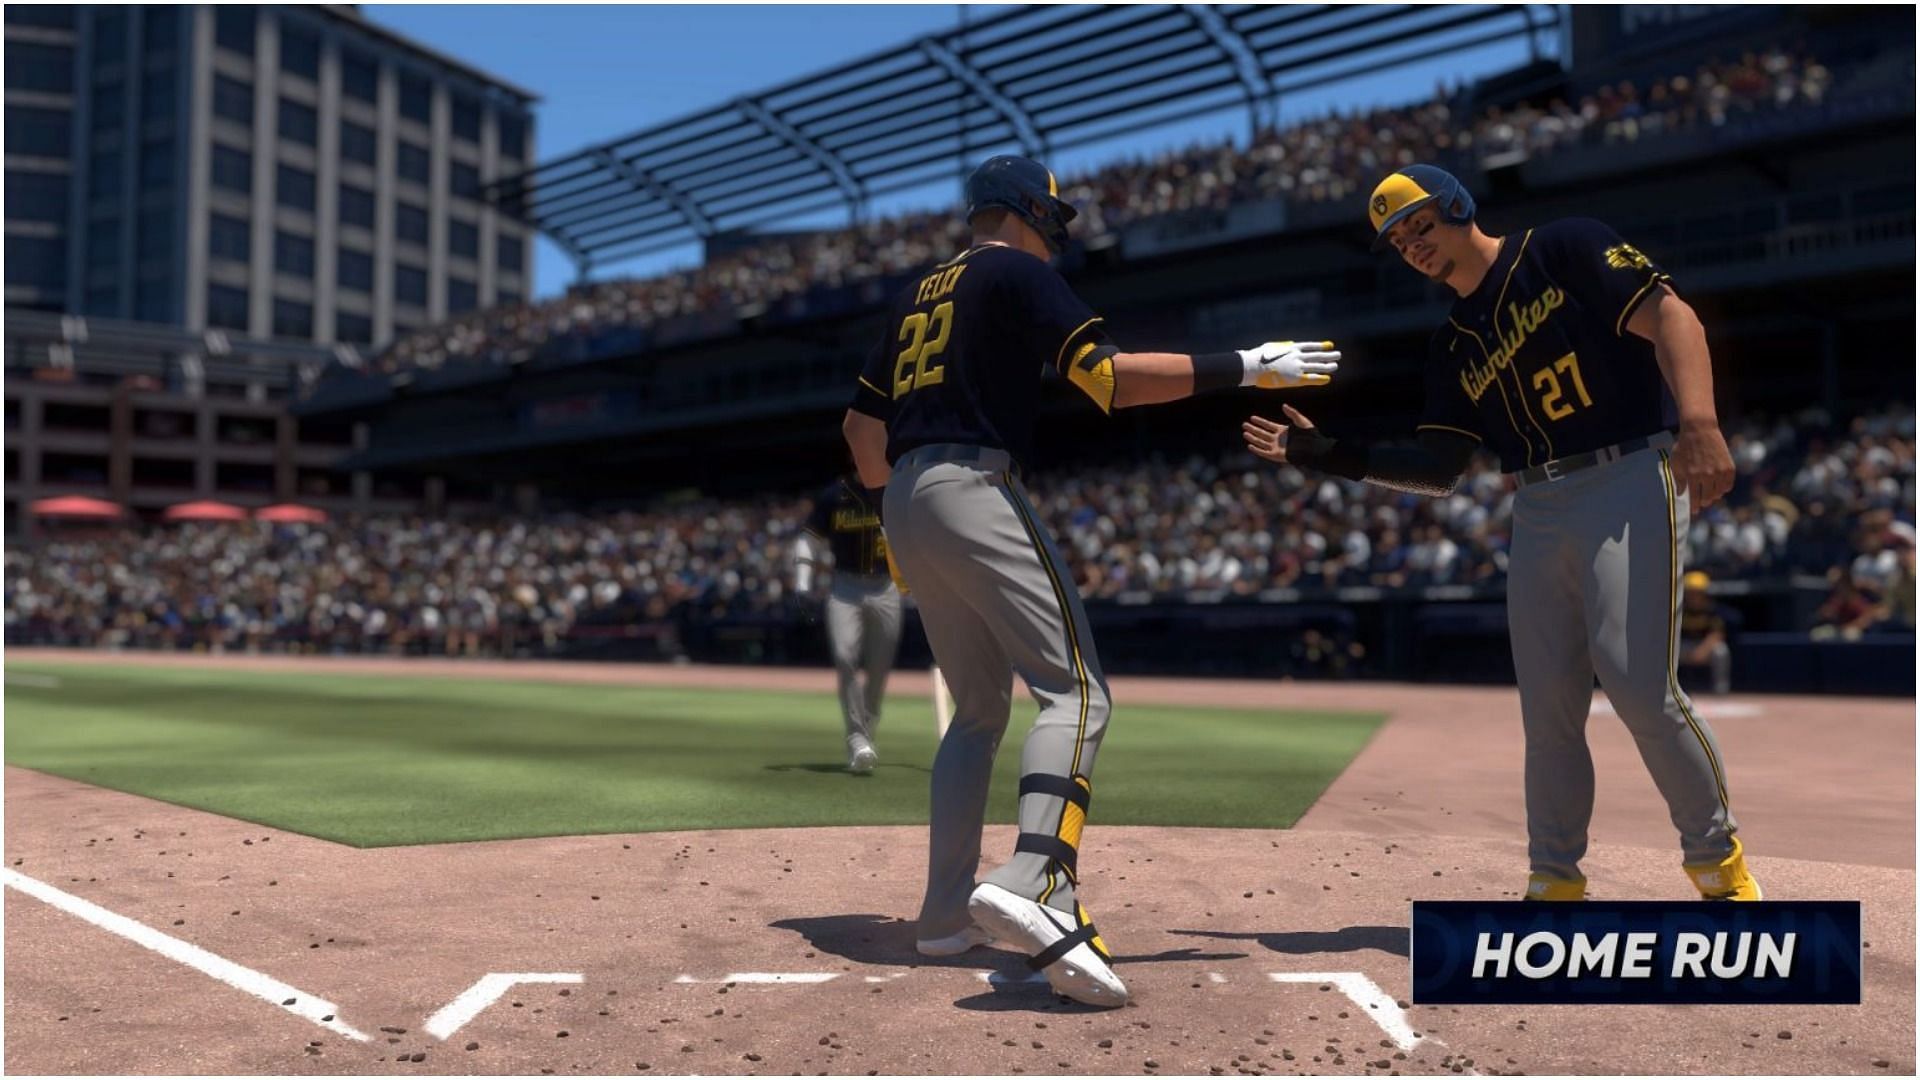 Sony's MLB: The Show 21 on Xbox Game Pass was an MLB decision